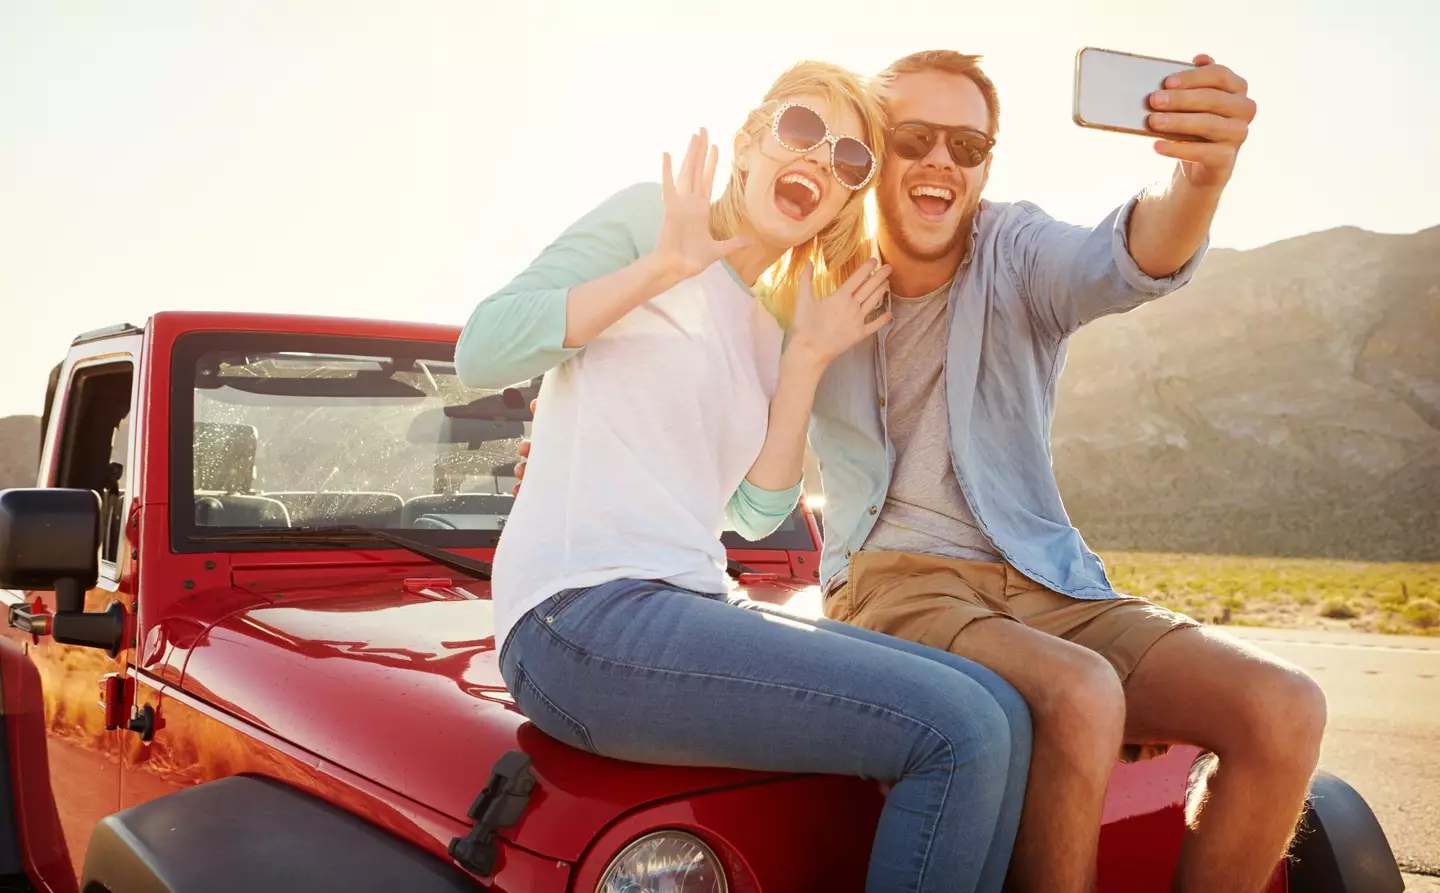 Selfies with an ex could soon be a thing of the past (